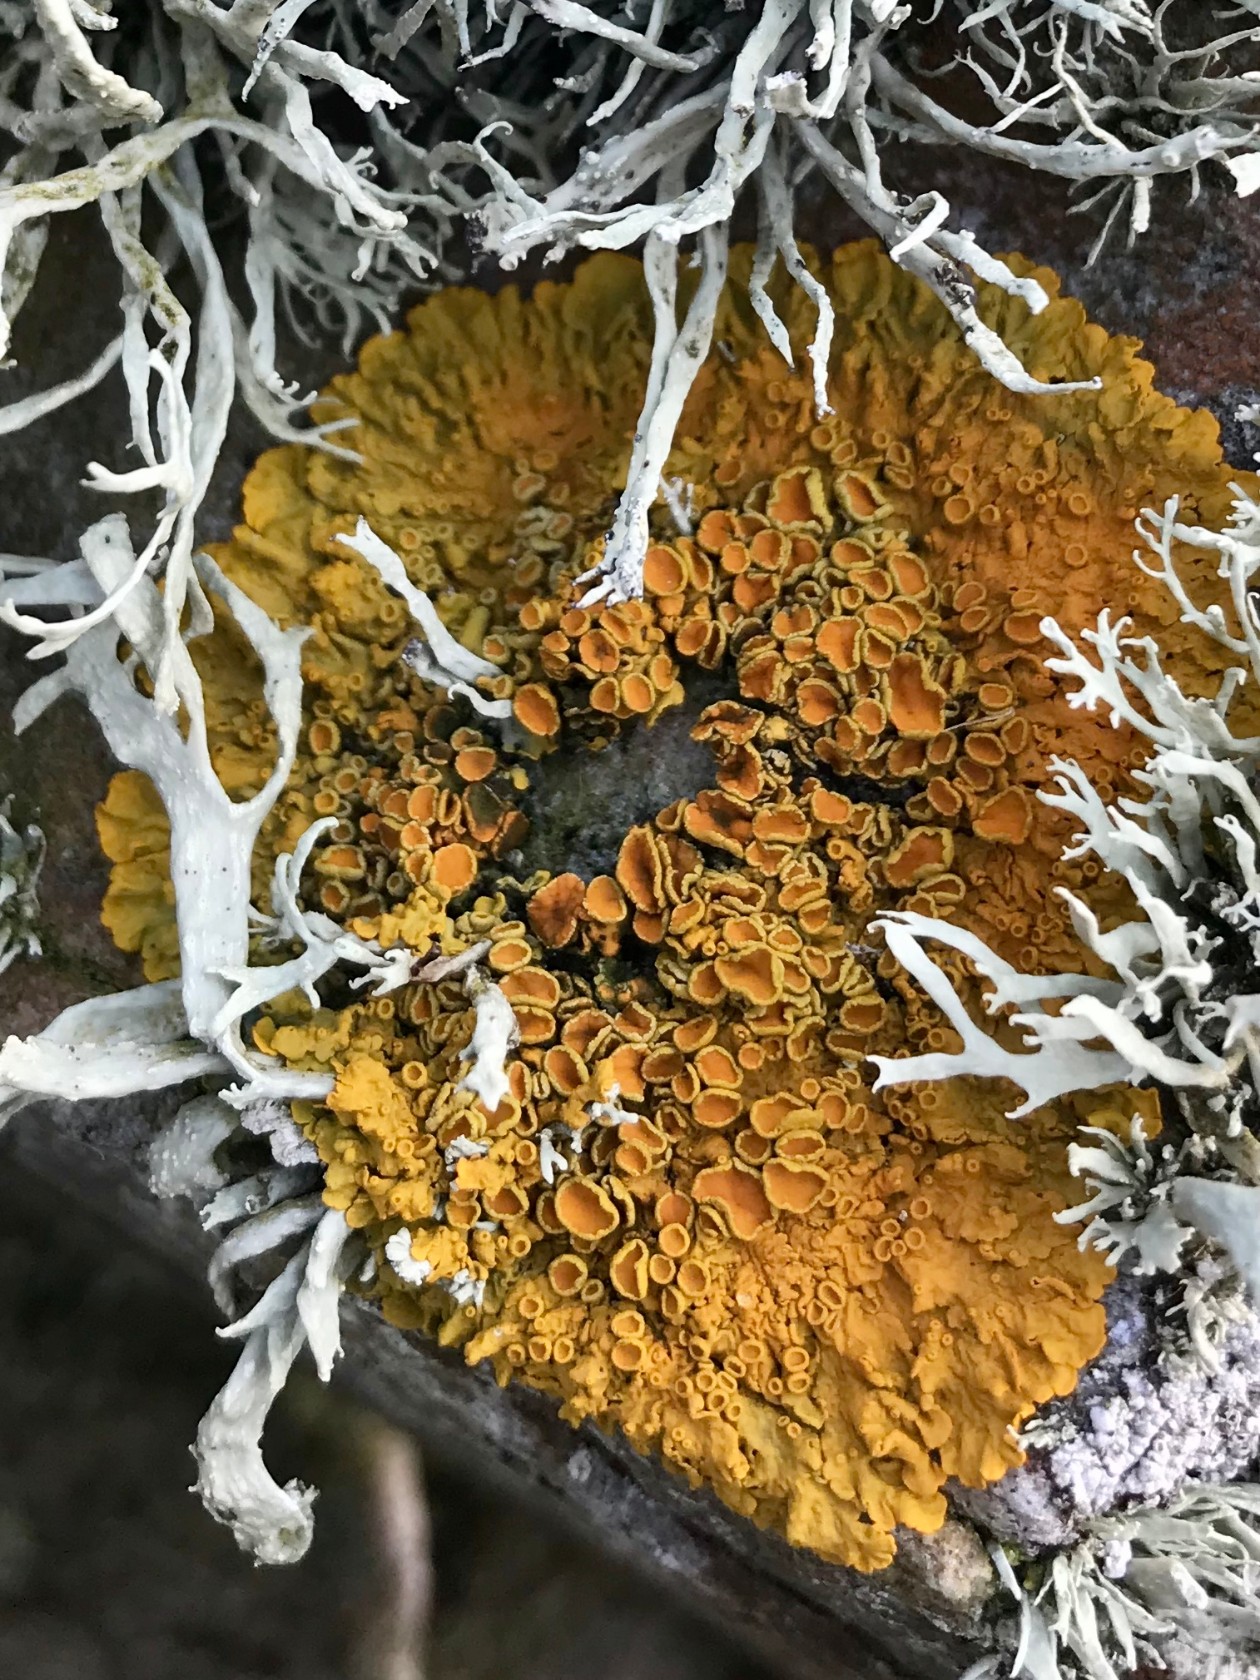 What to look for this week - The trouble with lichen